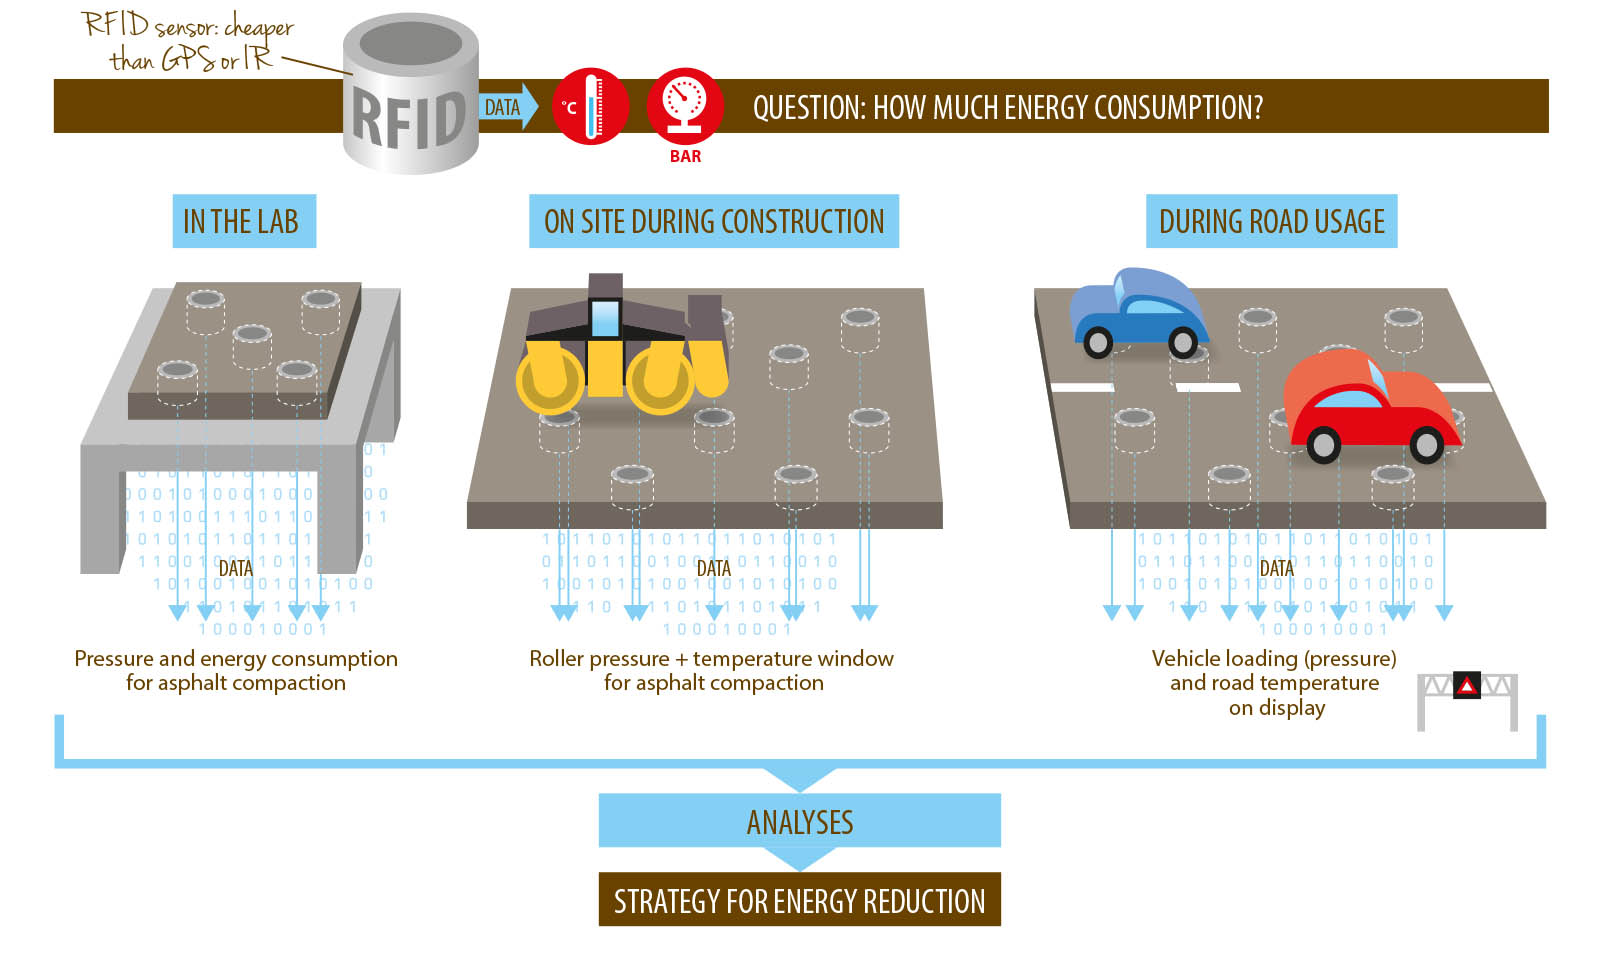 RFID sensors to measure the energy consumption of warm mix and recycled asphalt